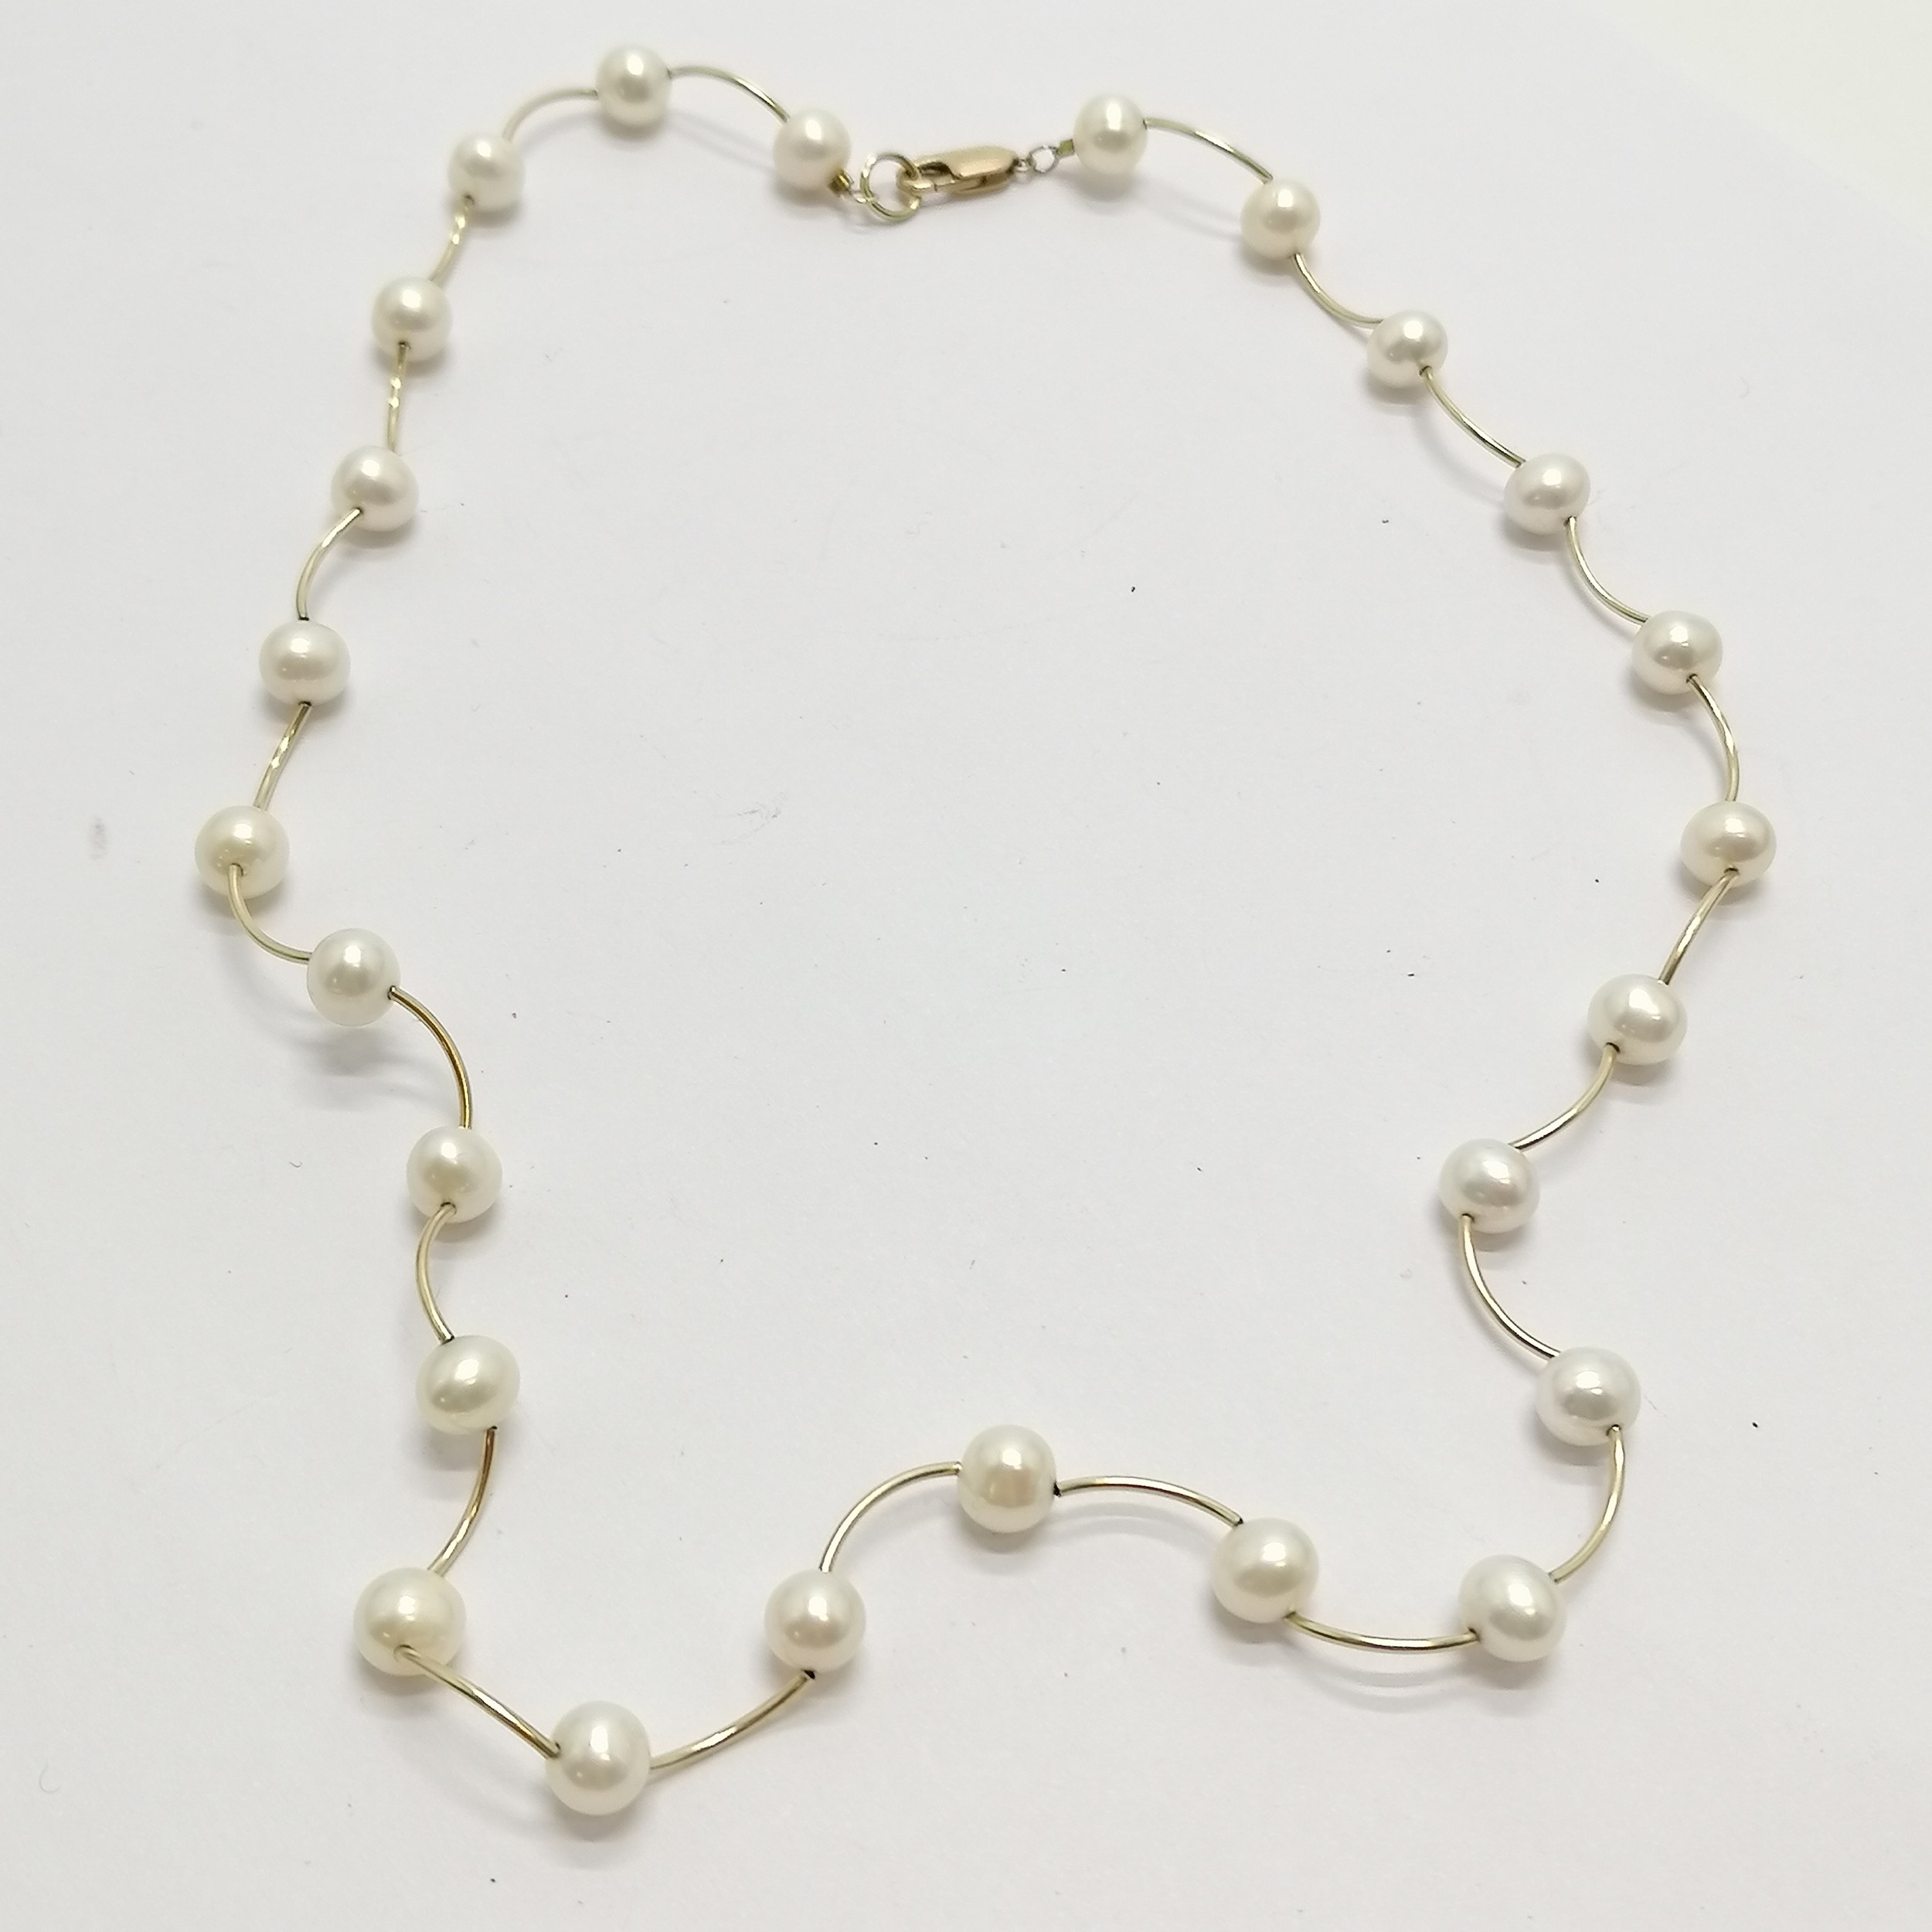 9ct marked gold pearl bead necklace - 46cm & 13.5g total weight - SOLD ON BEHALF OF THE NEW BREAST - Image 2 of 2